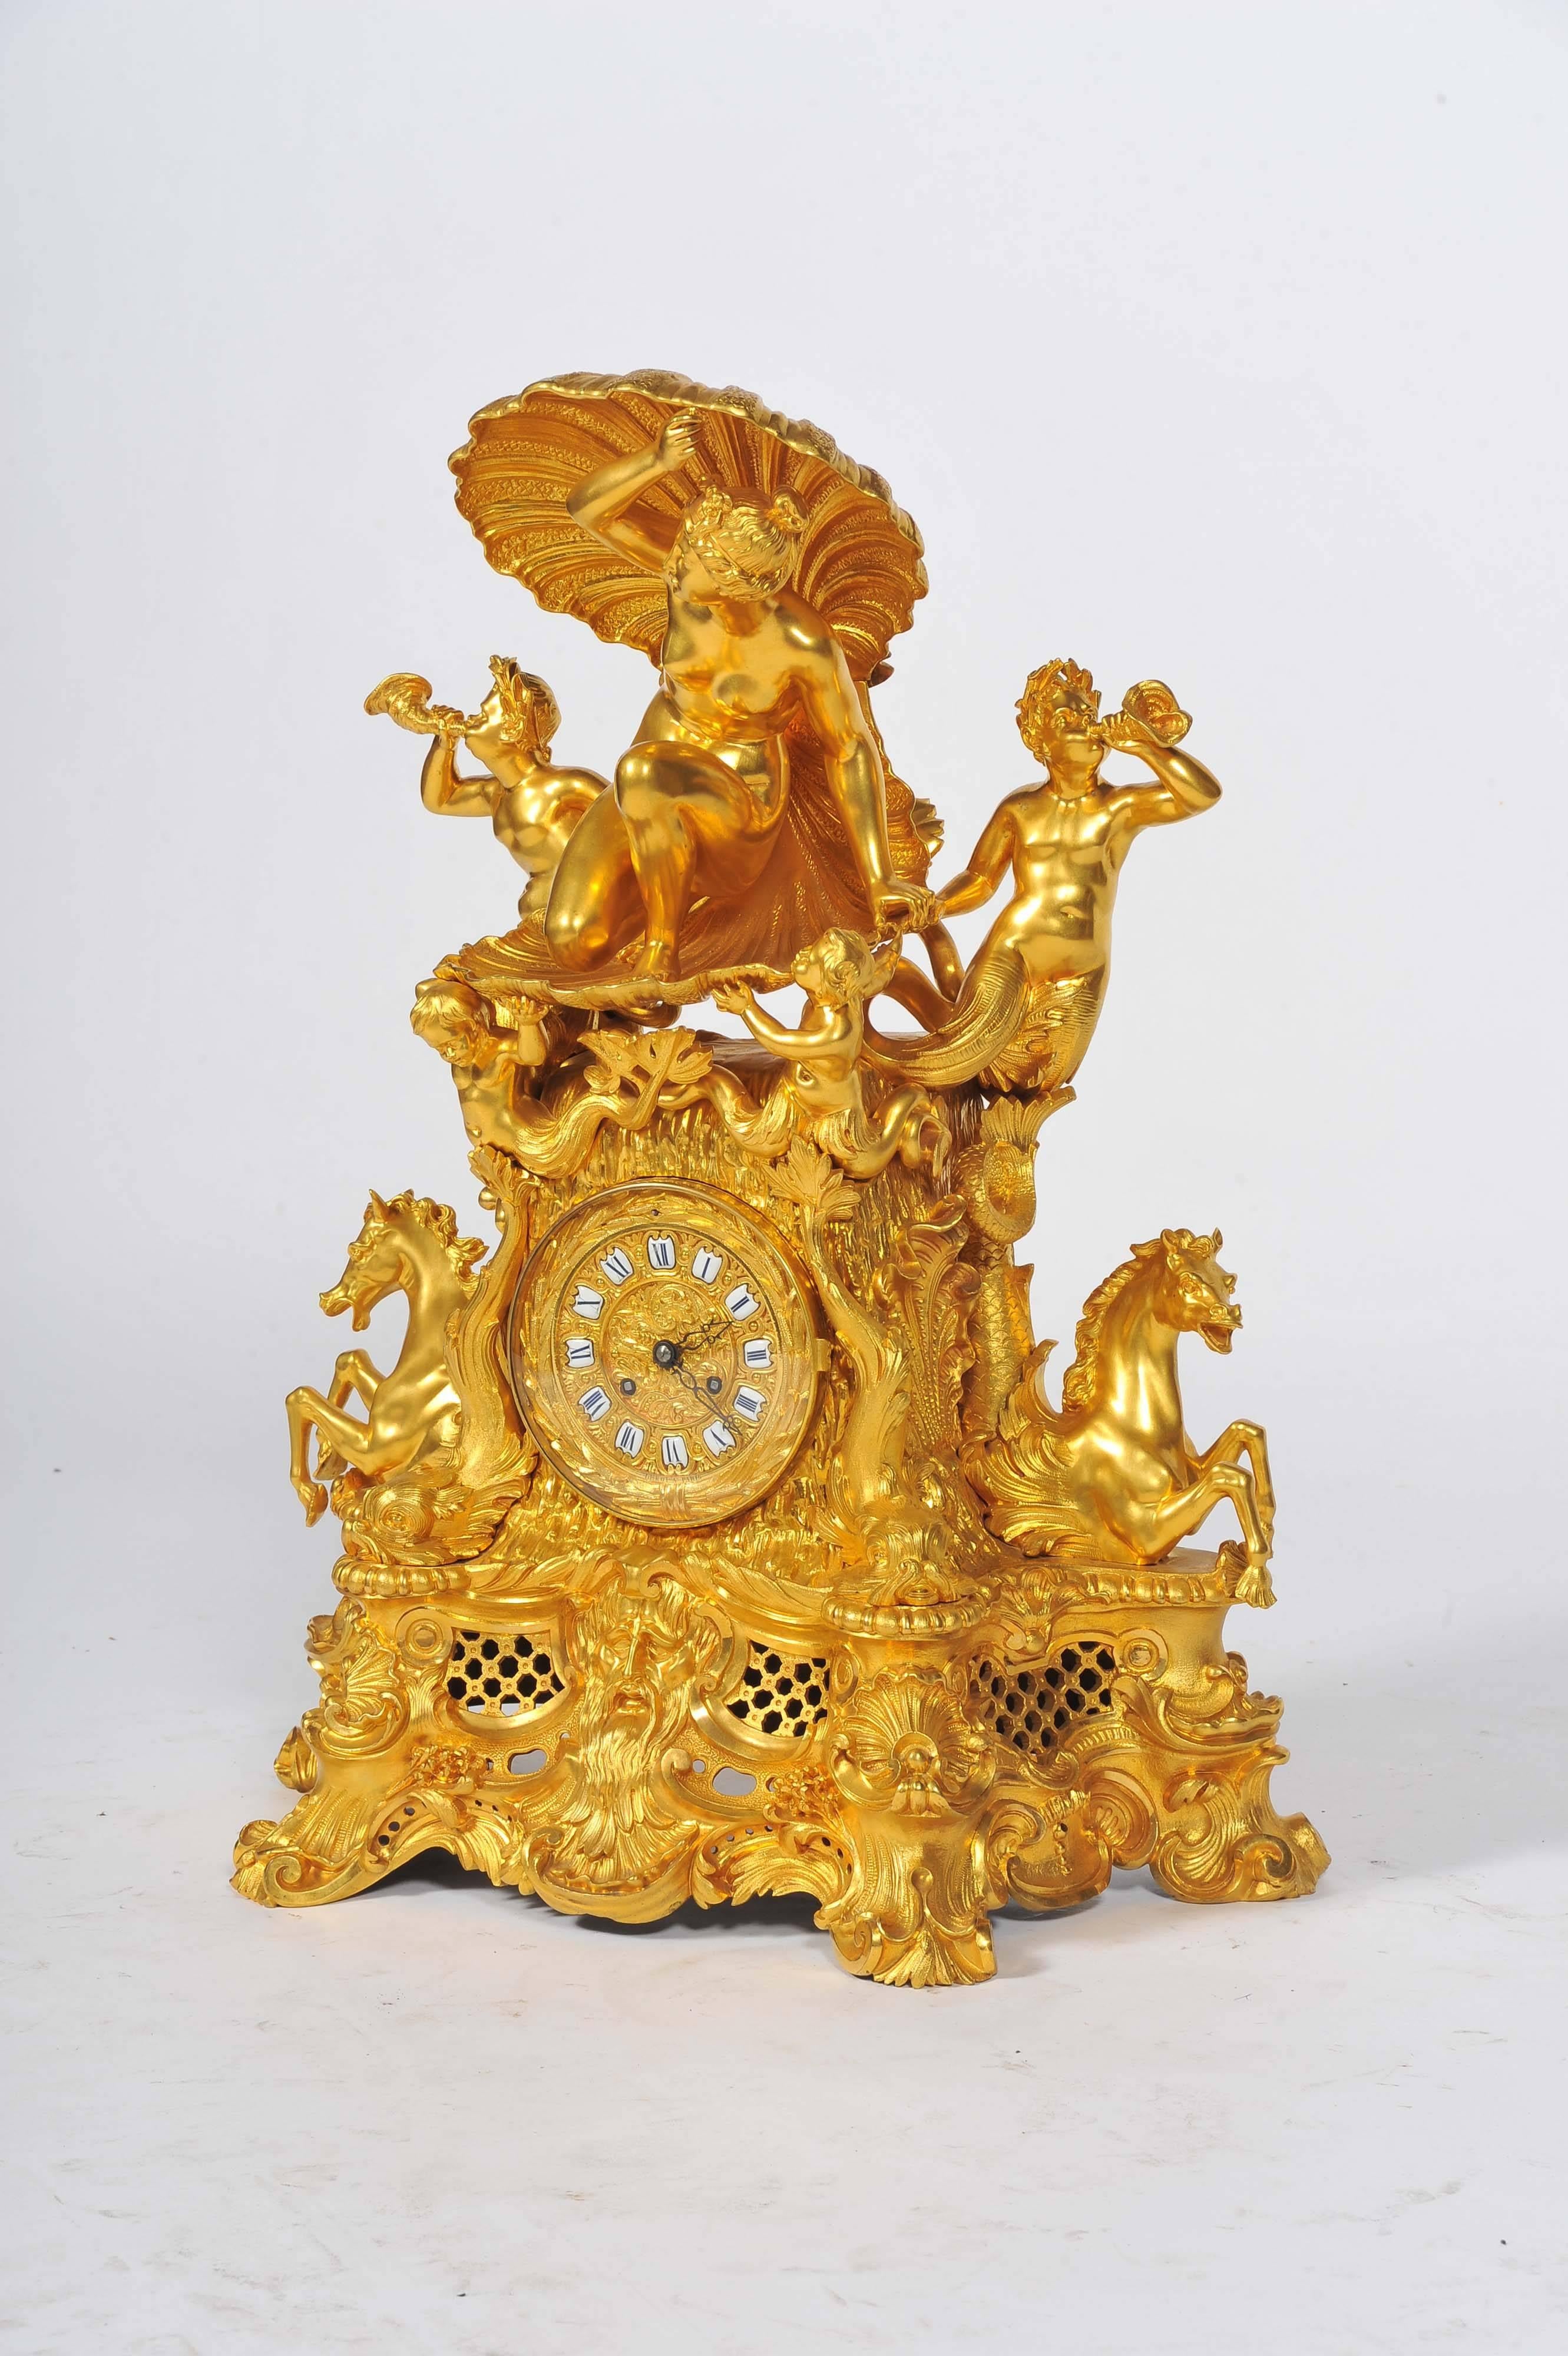 A very impressive gilded ormolu mantel clock, depicting sea shells, horses, urchins and dolphins. The eight day striking clock with enamel numerals.